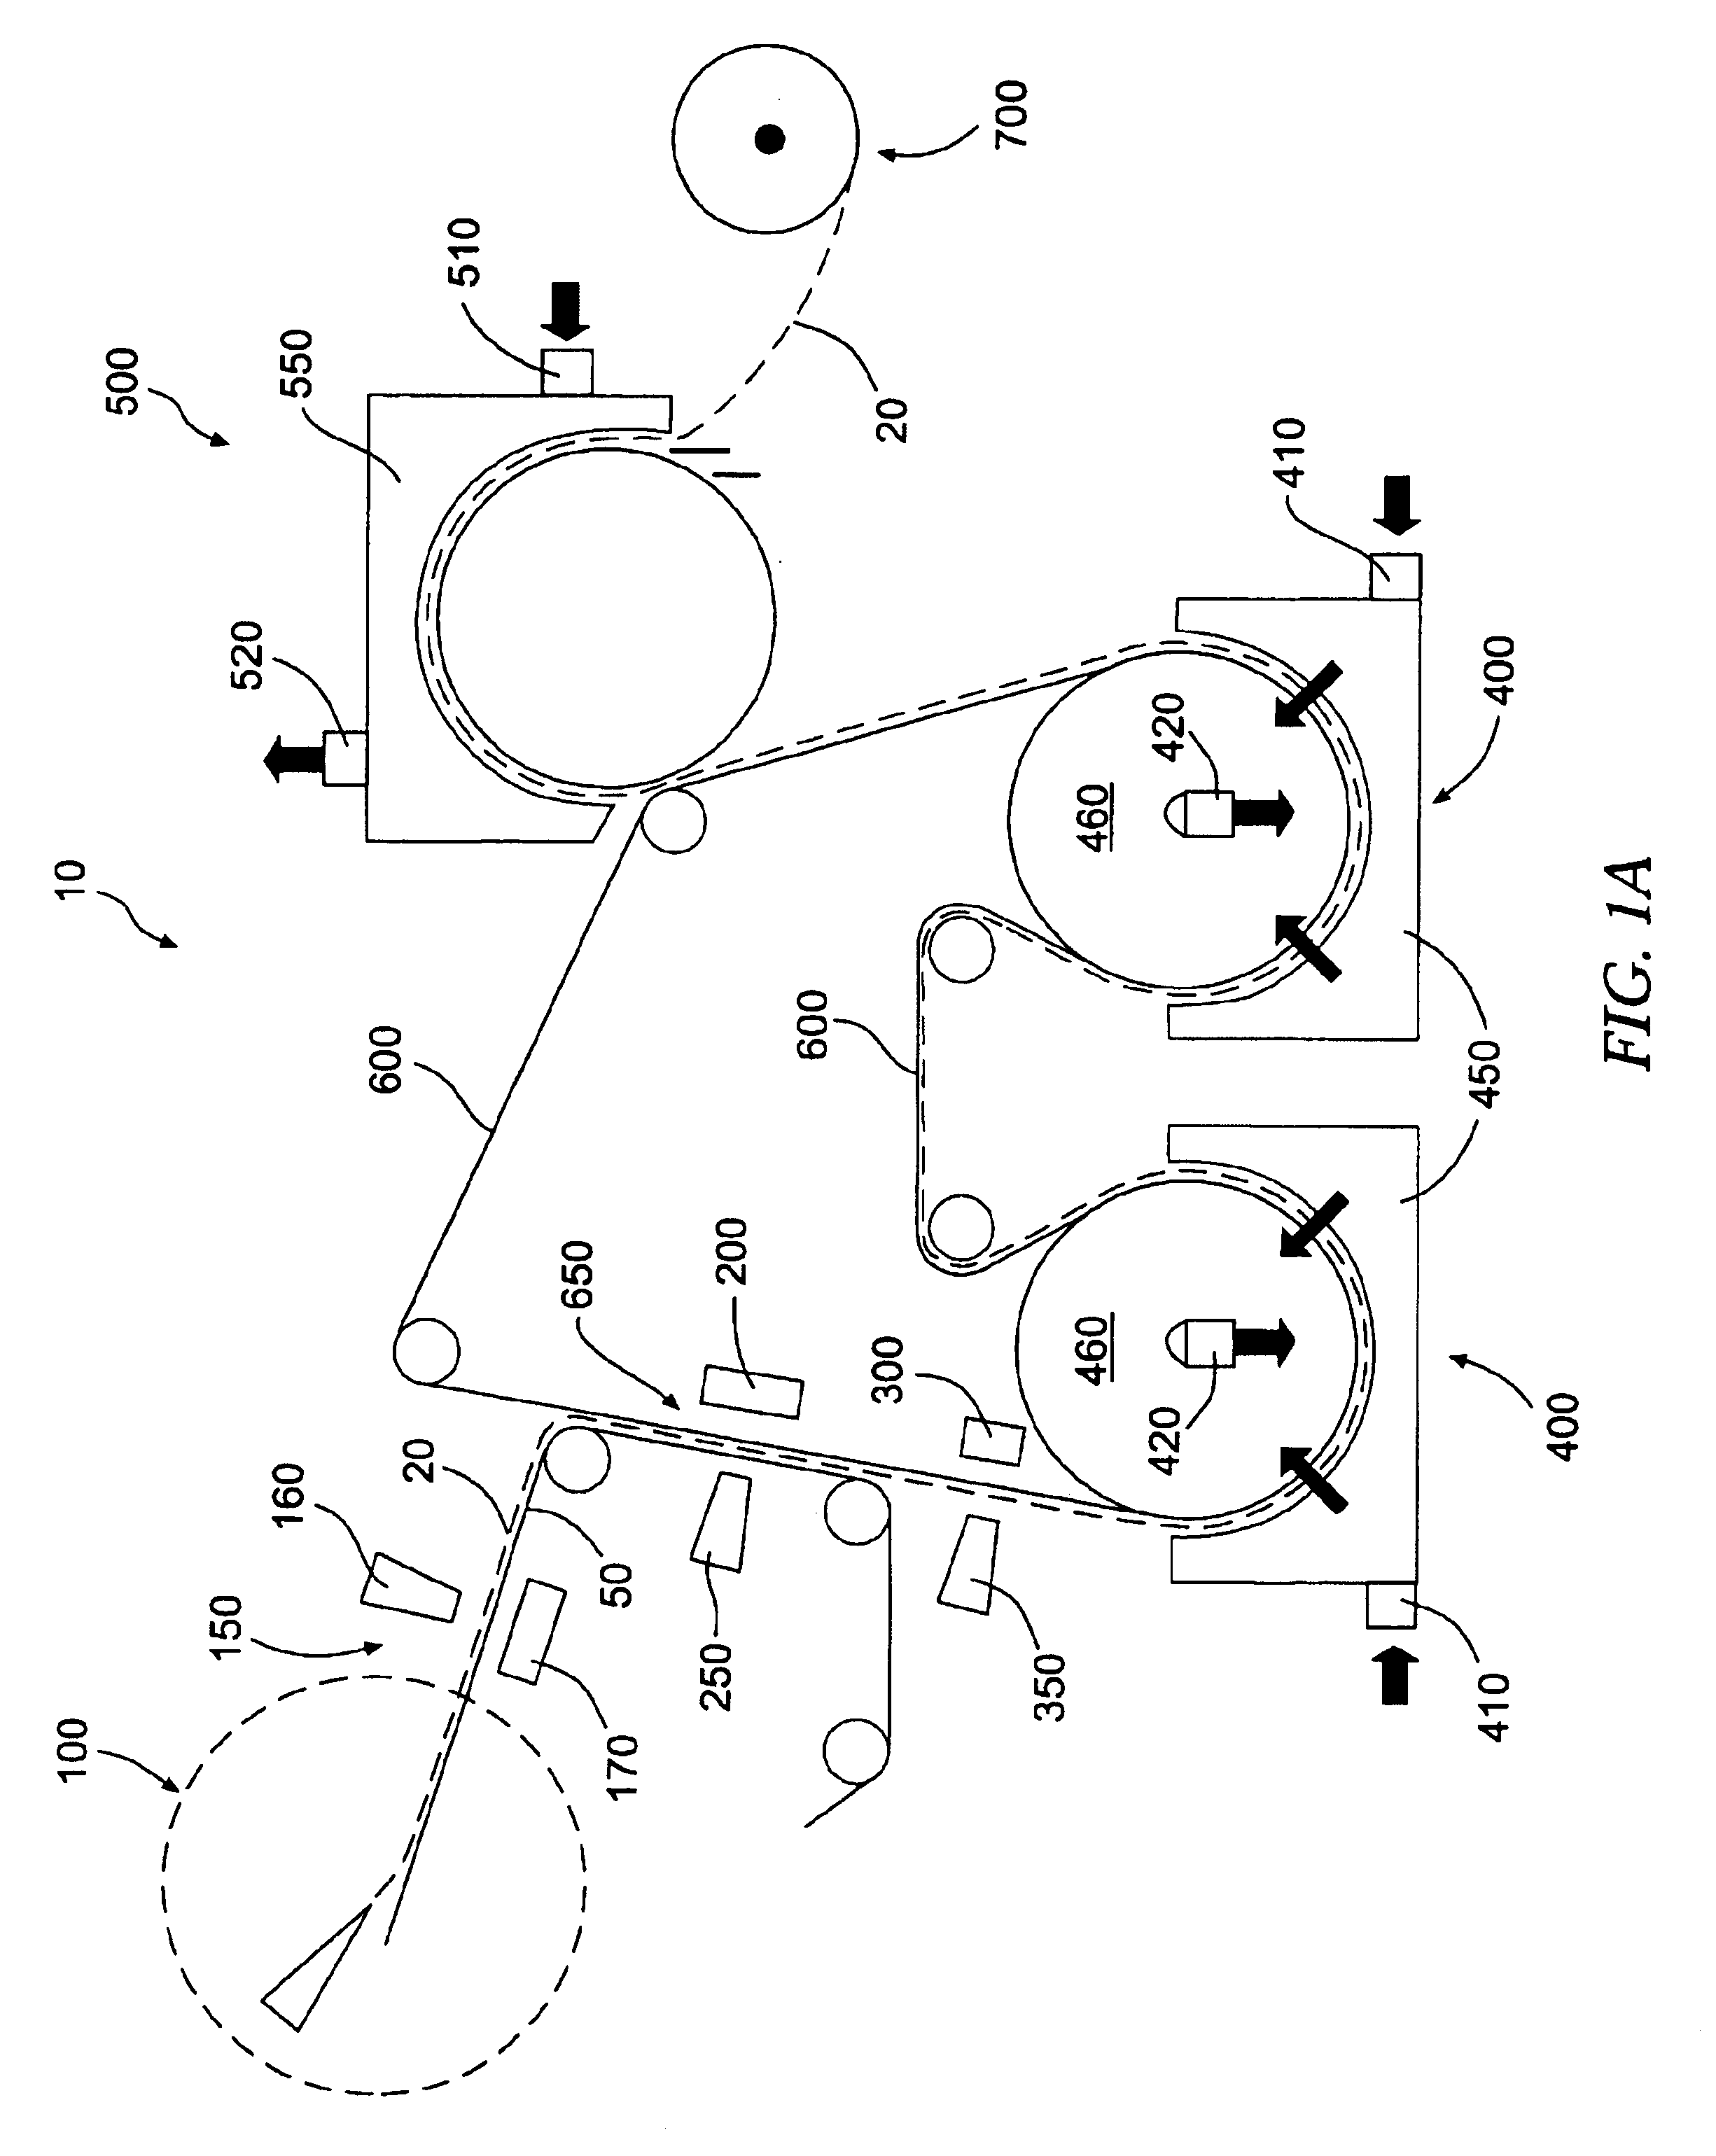 Apparatus for dewatering a paper web and associated system and method